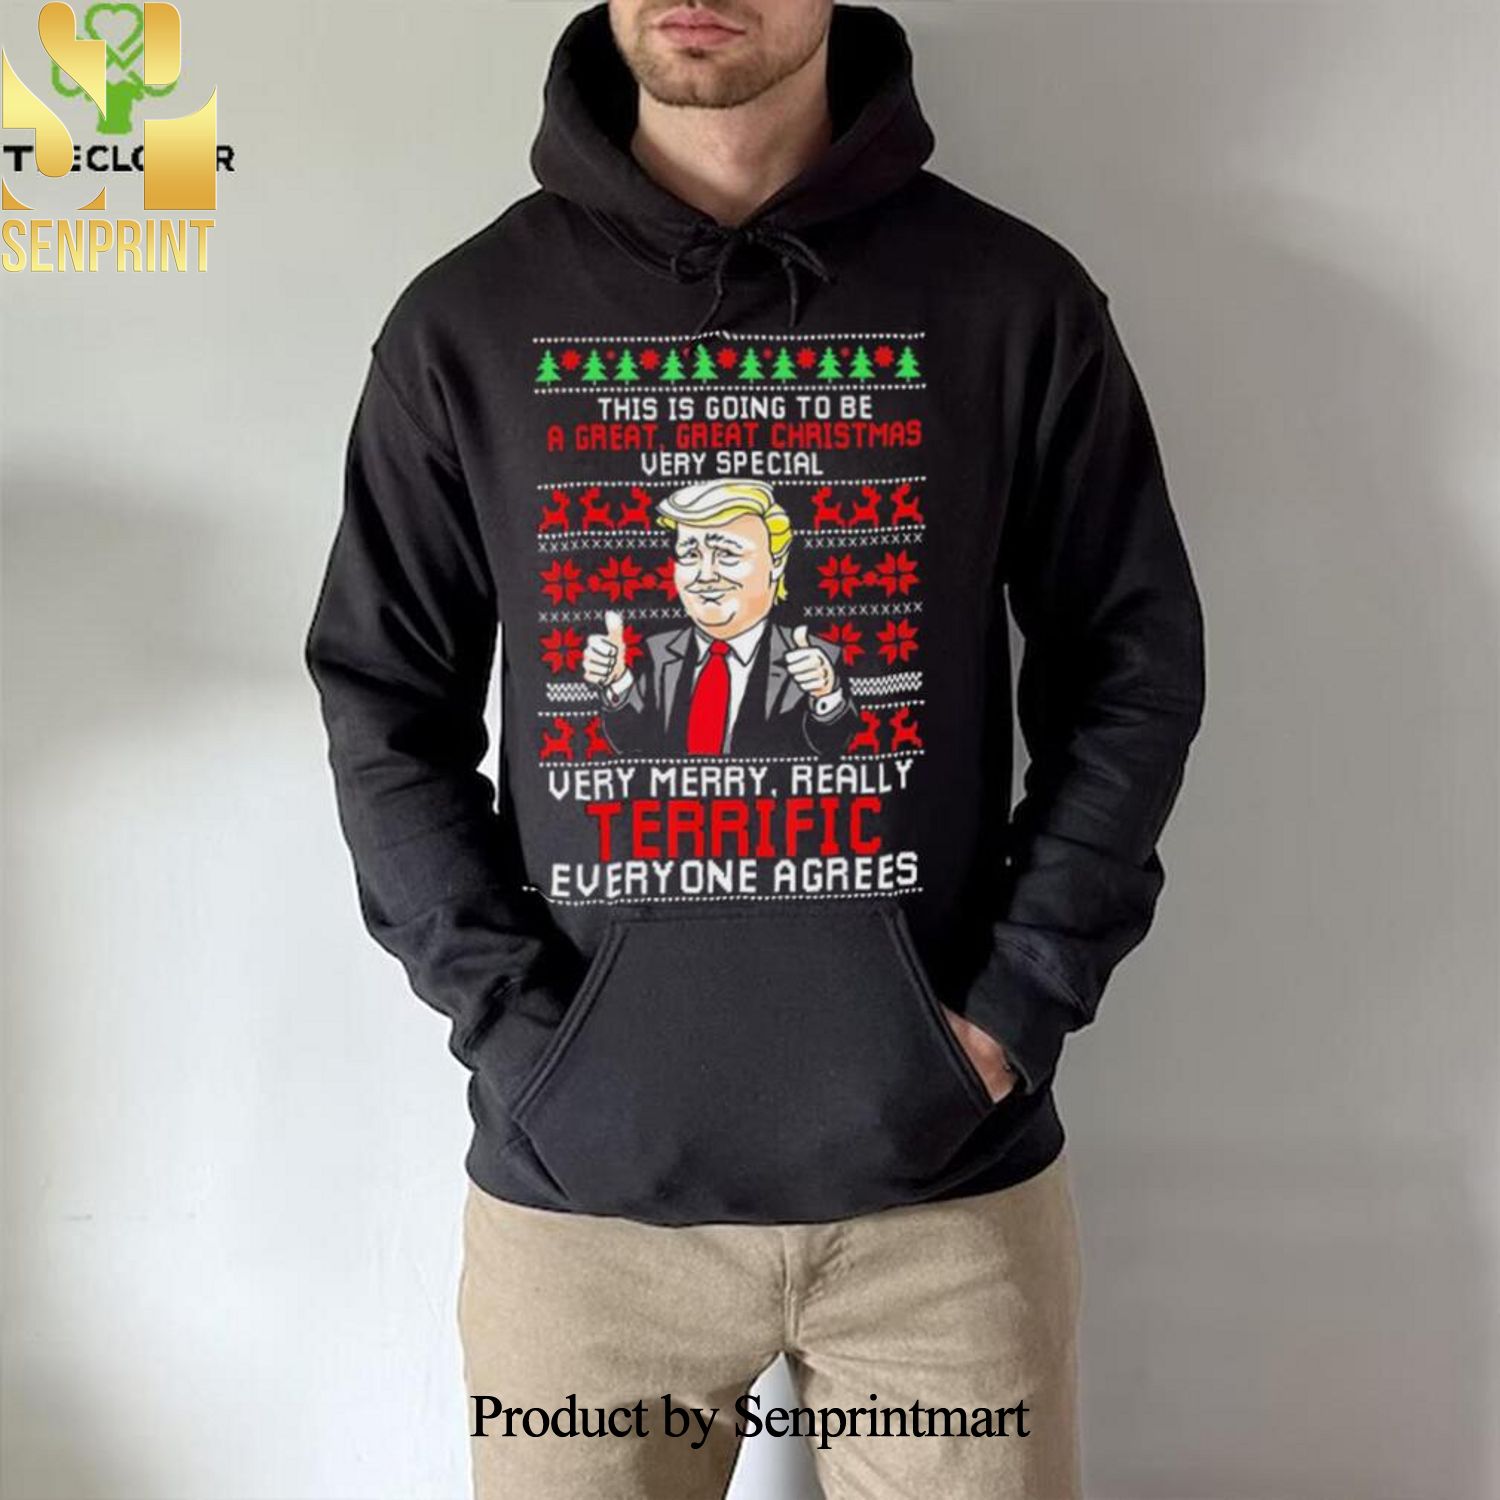 This Is Going To Be A Great Christmas Fun Trump Shirt Ugly Xmas Wool Knitted Sweater